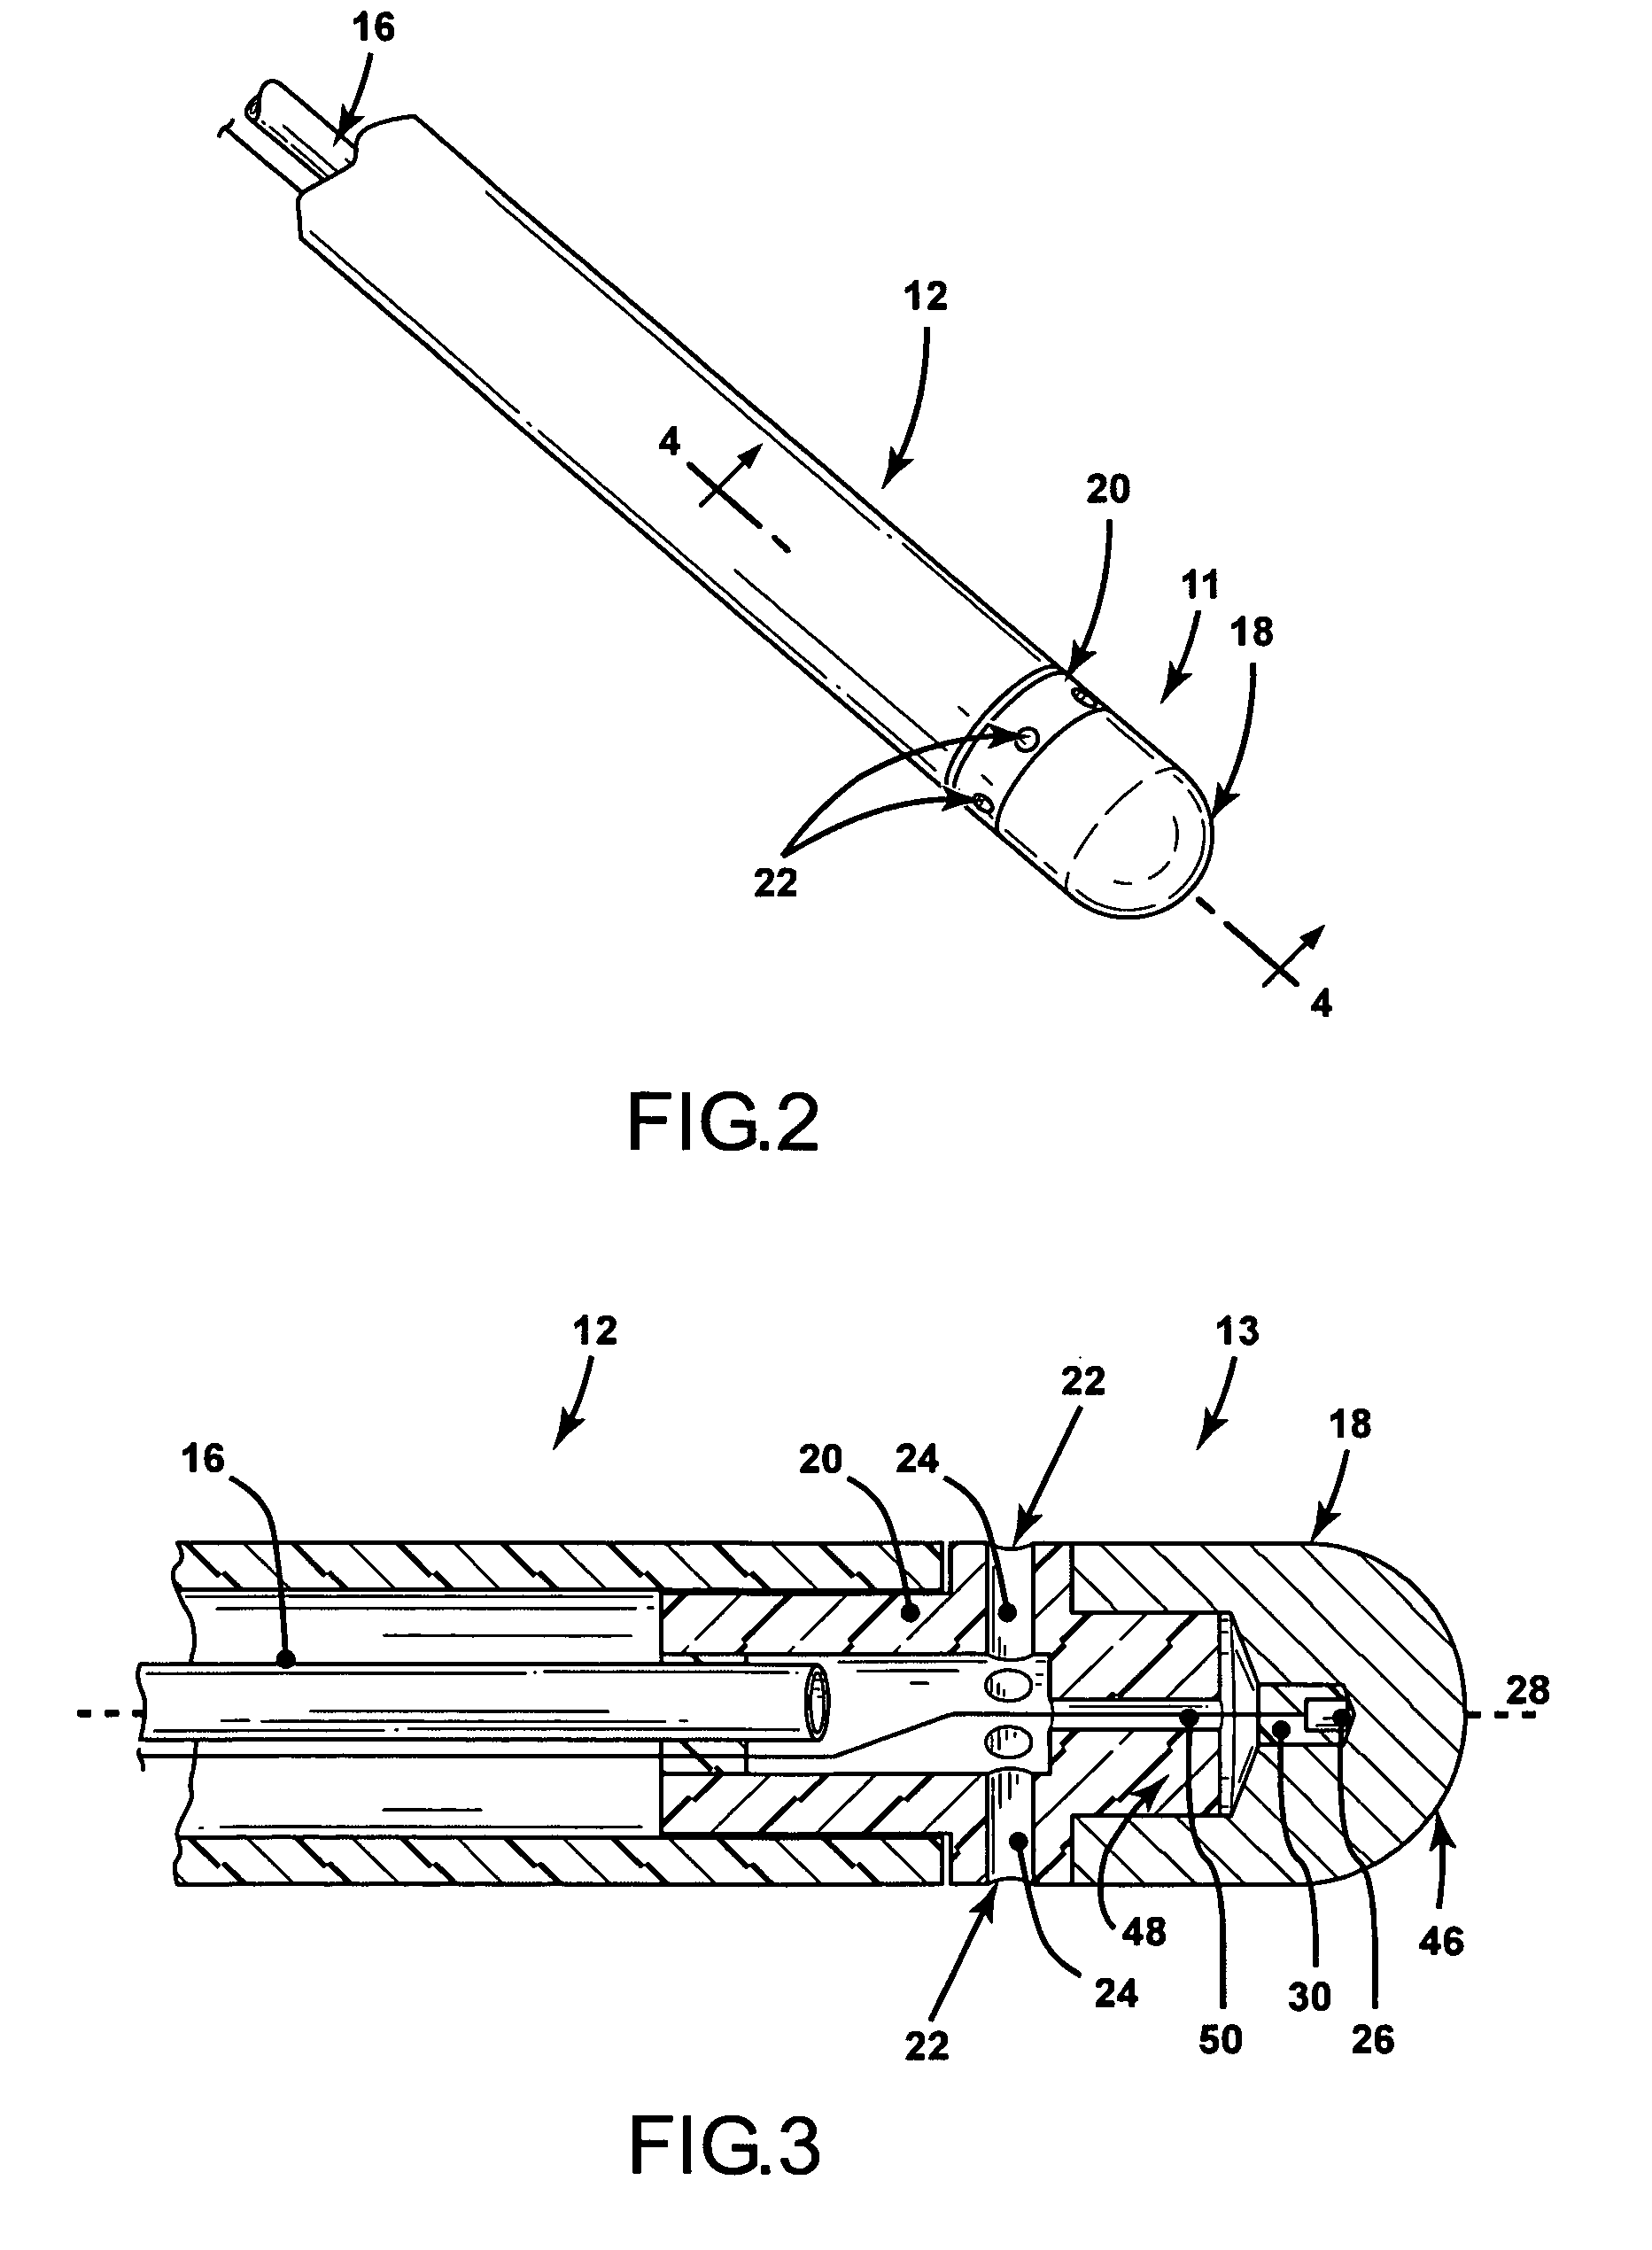 Ablation electrode assembly and methods for improved control of temperature and minimization of coagulation and tissue damage